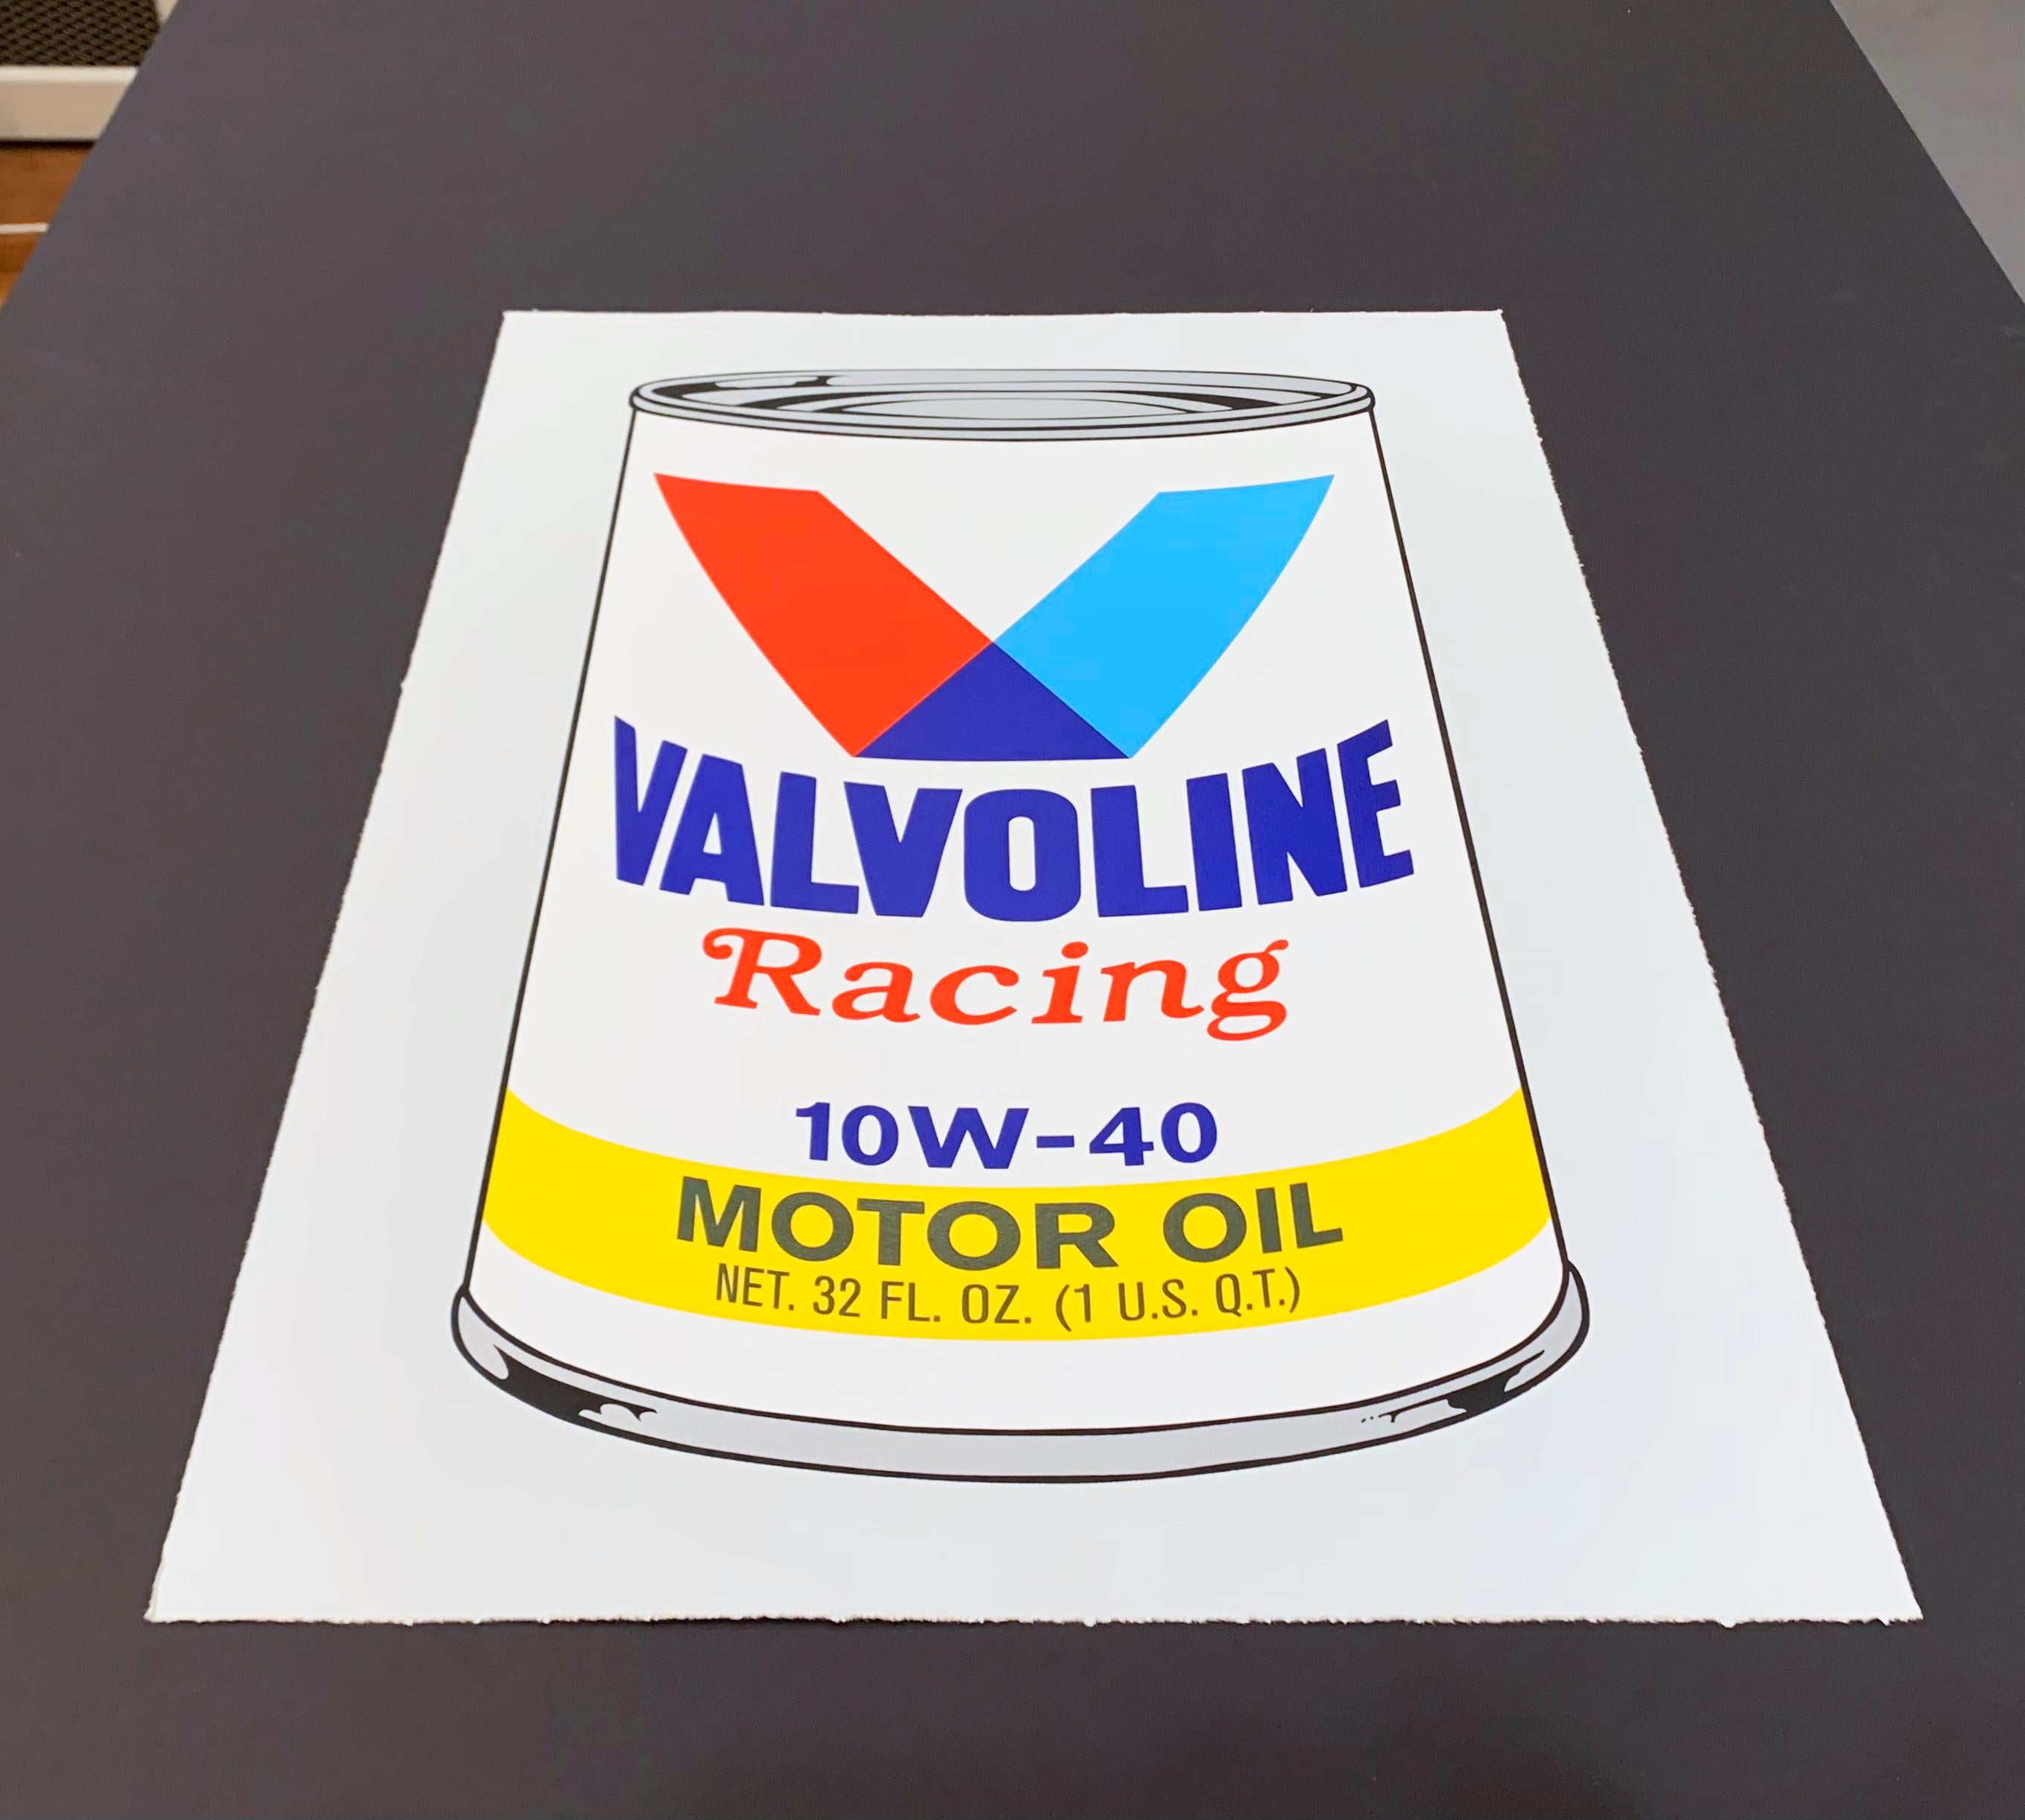 Artist: Heiner Meyer
Medium: Screenprint (multi-colored) on handmade paper
Title: Valvoline
Portfolio: Masterpieces in Oils
Signed: Hand signed and numbered on reverse
Year: 2016
Edition: 45/60
Framed Size: 32 3/4